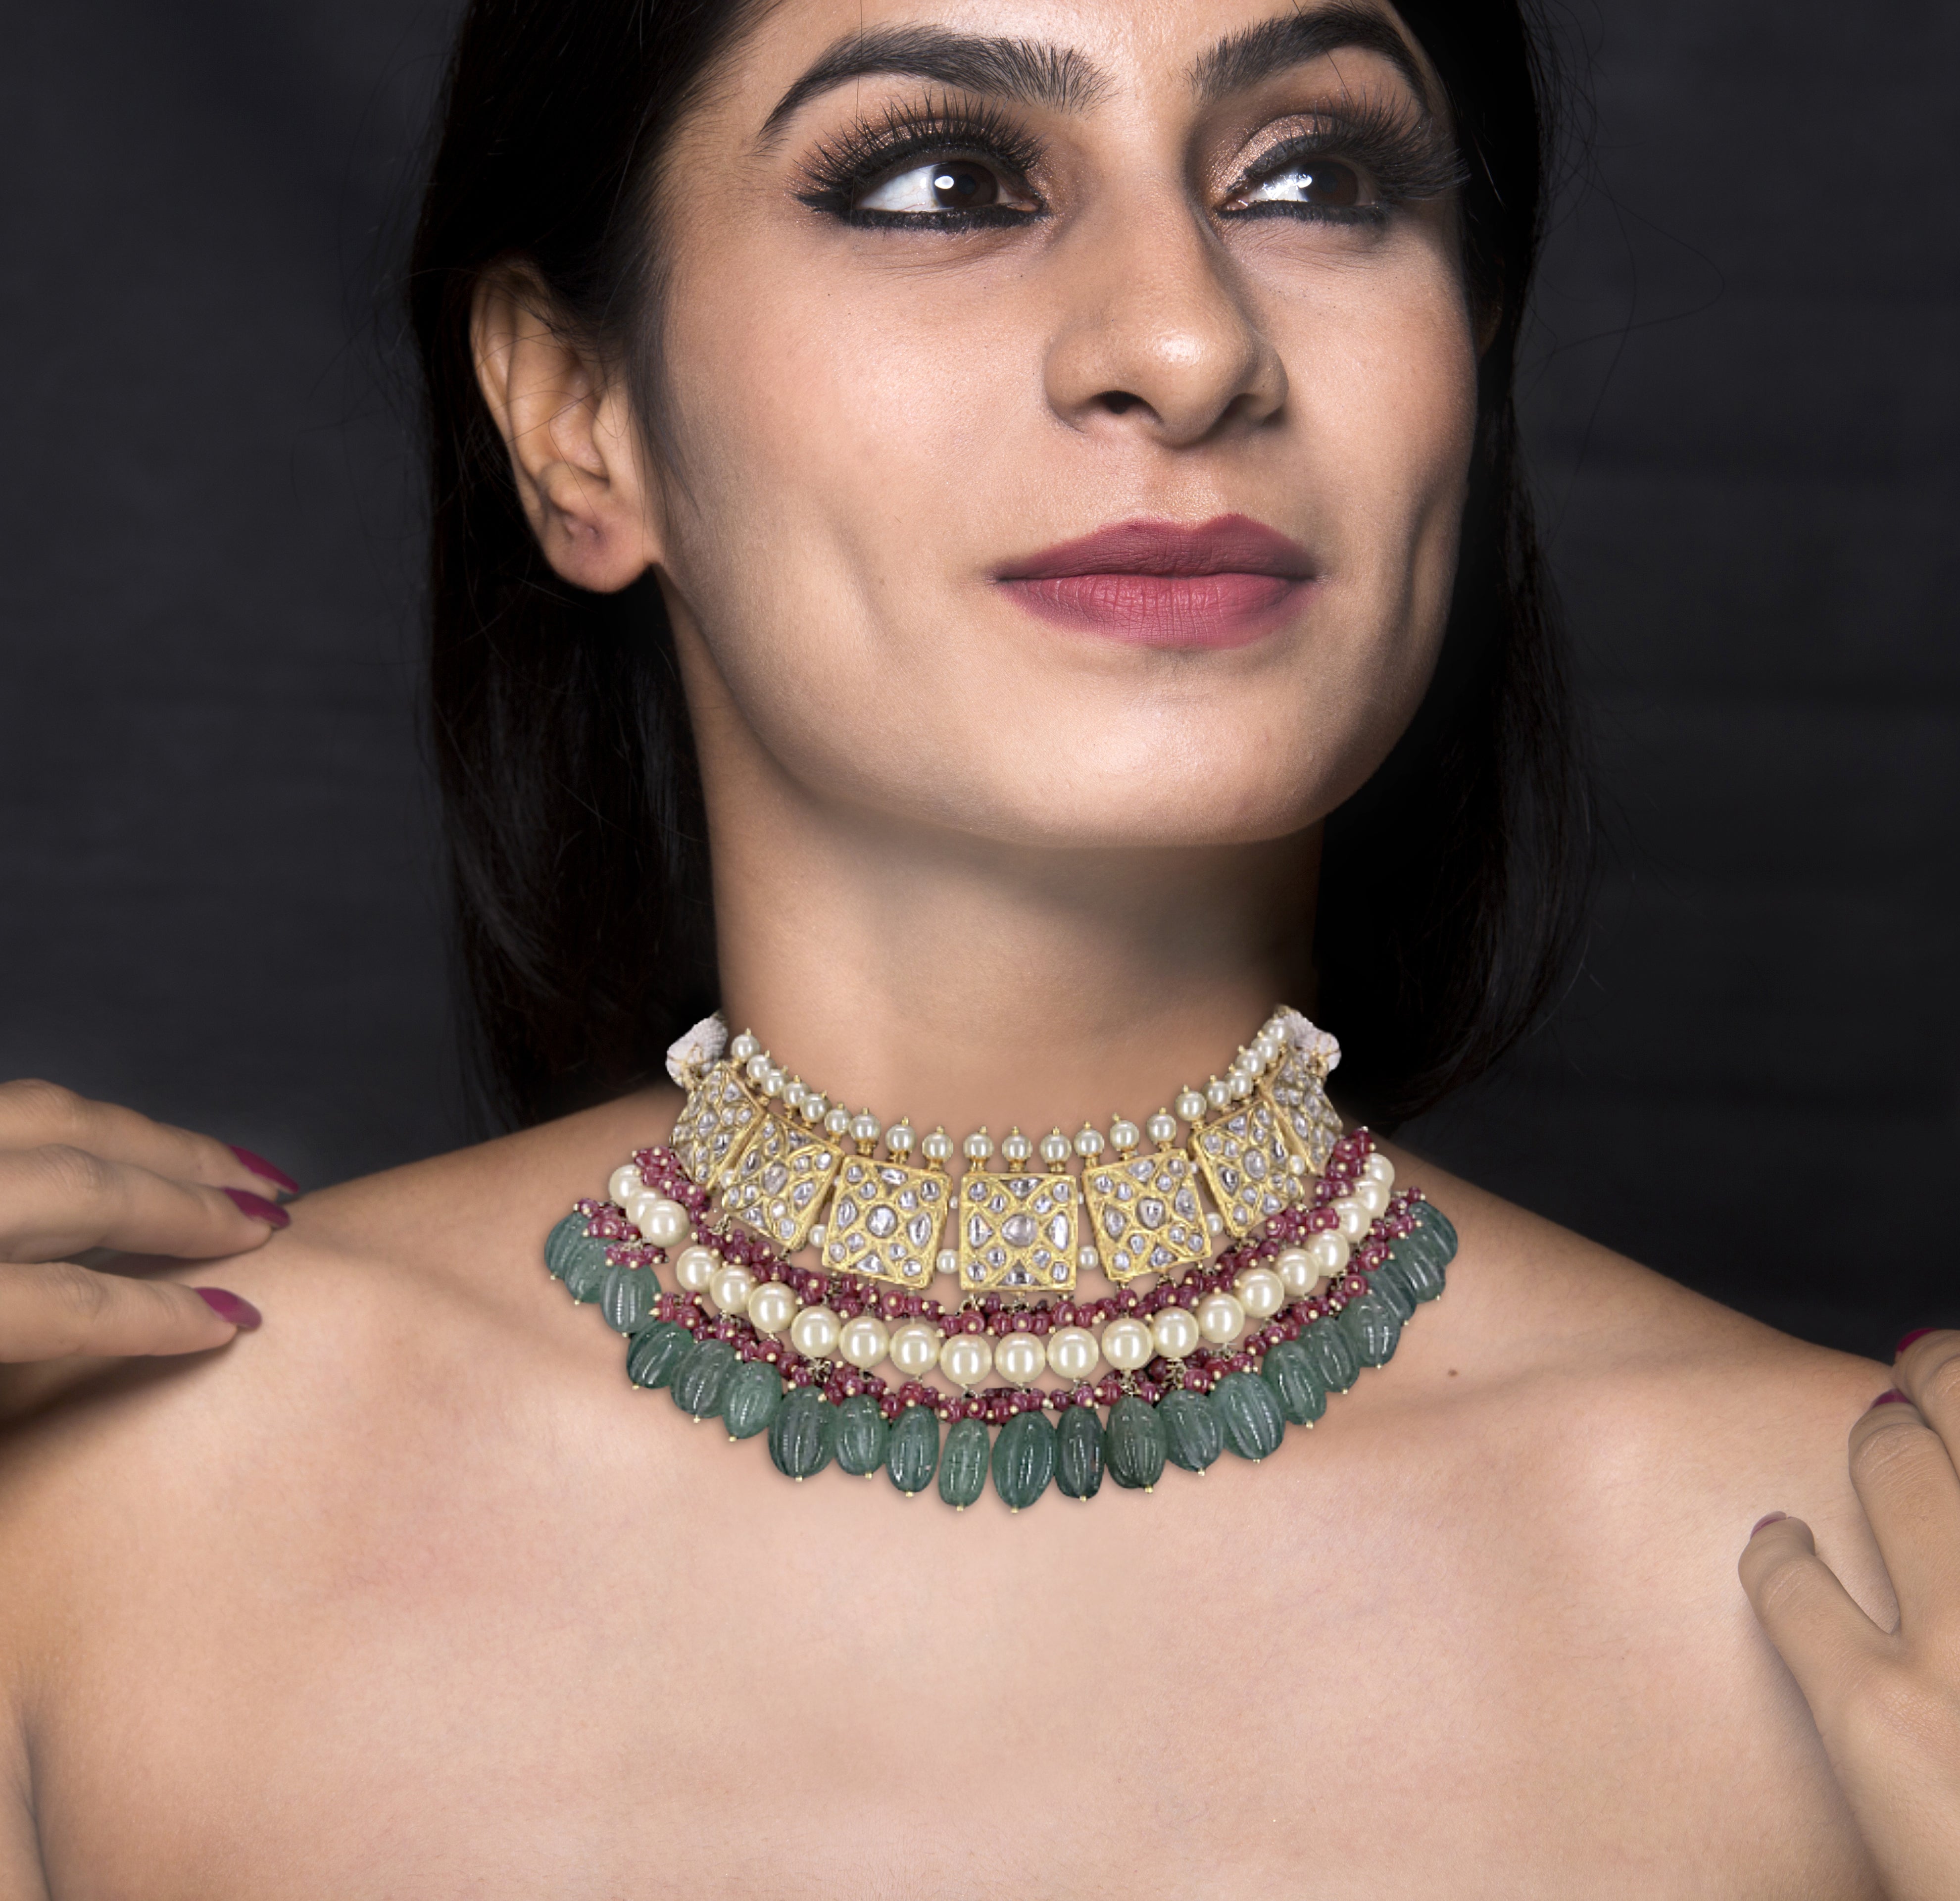 23k Gold and Diamond Polki Choker Necklace Set with Green Strawberry Quartz, Rubies and Pearls